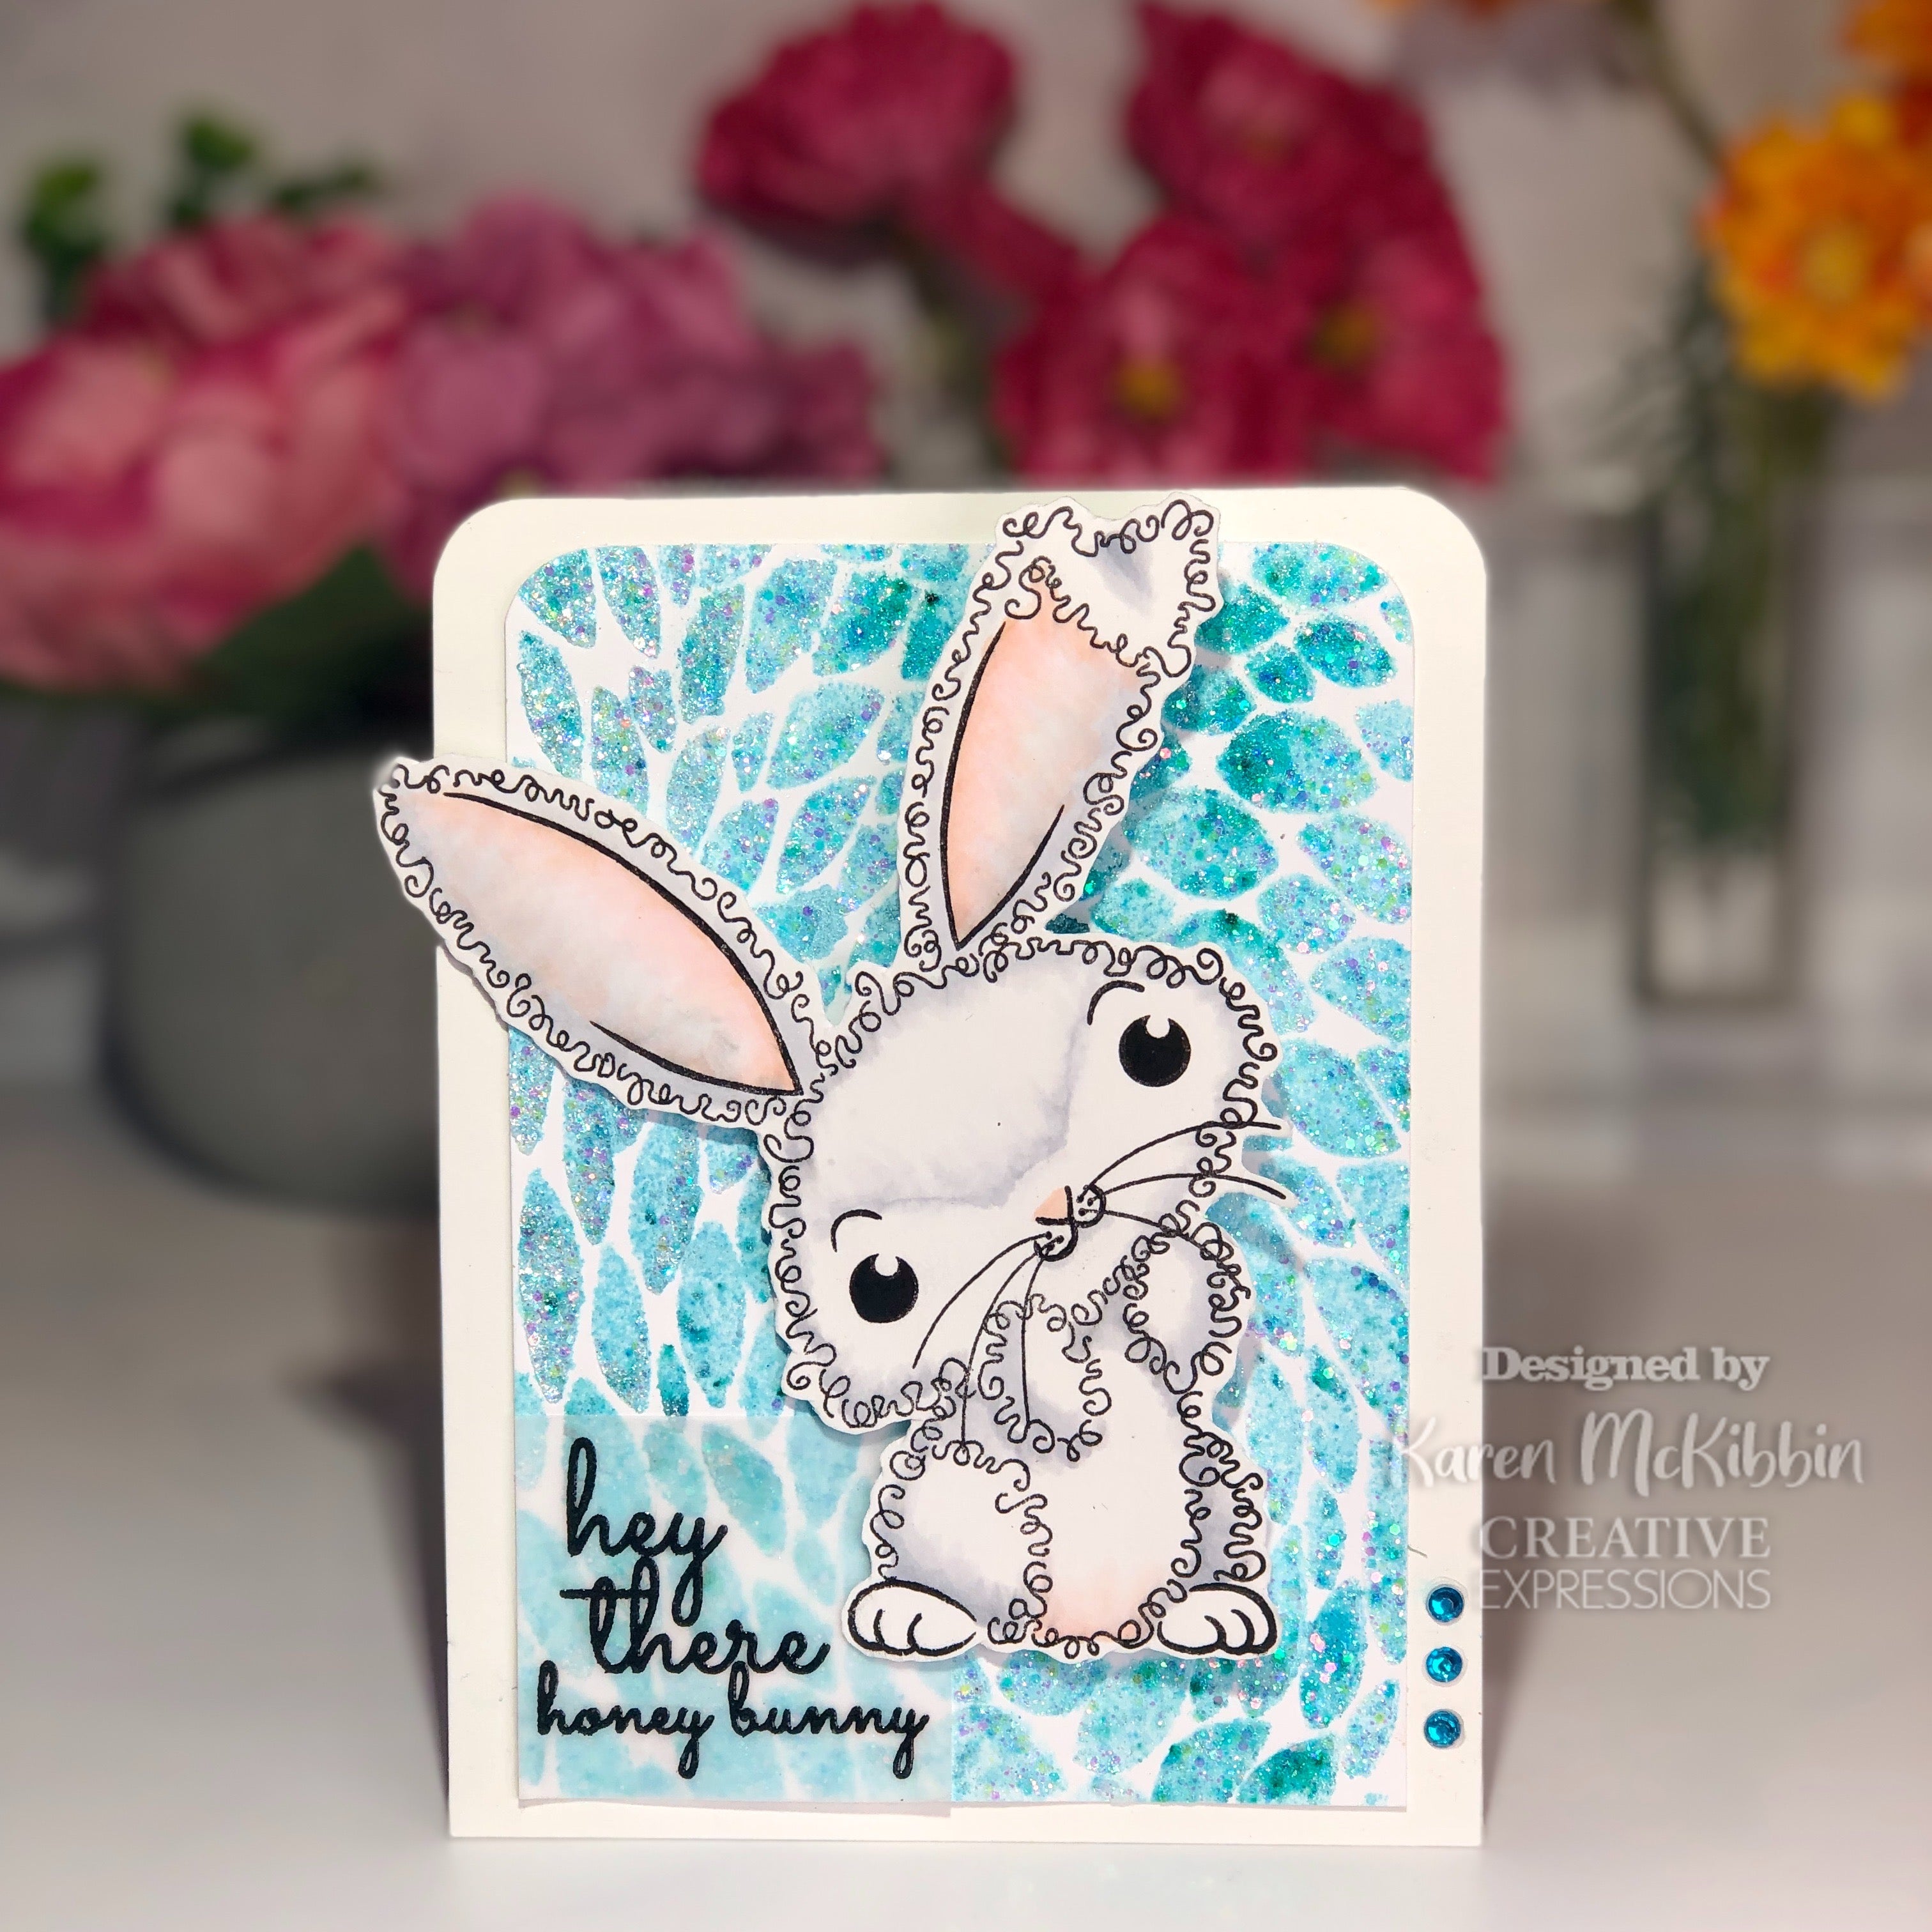 Woodware Clear Singles Fuzzie Friends Bella The Bunny 4 in x 6 in Stamp